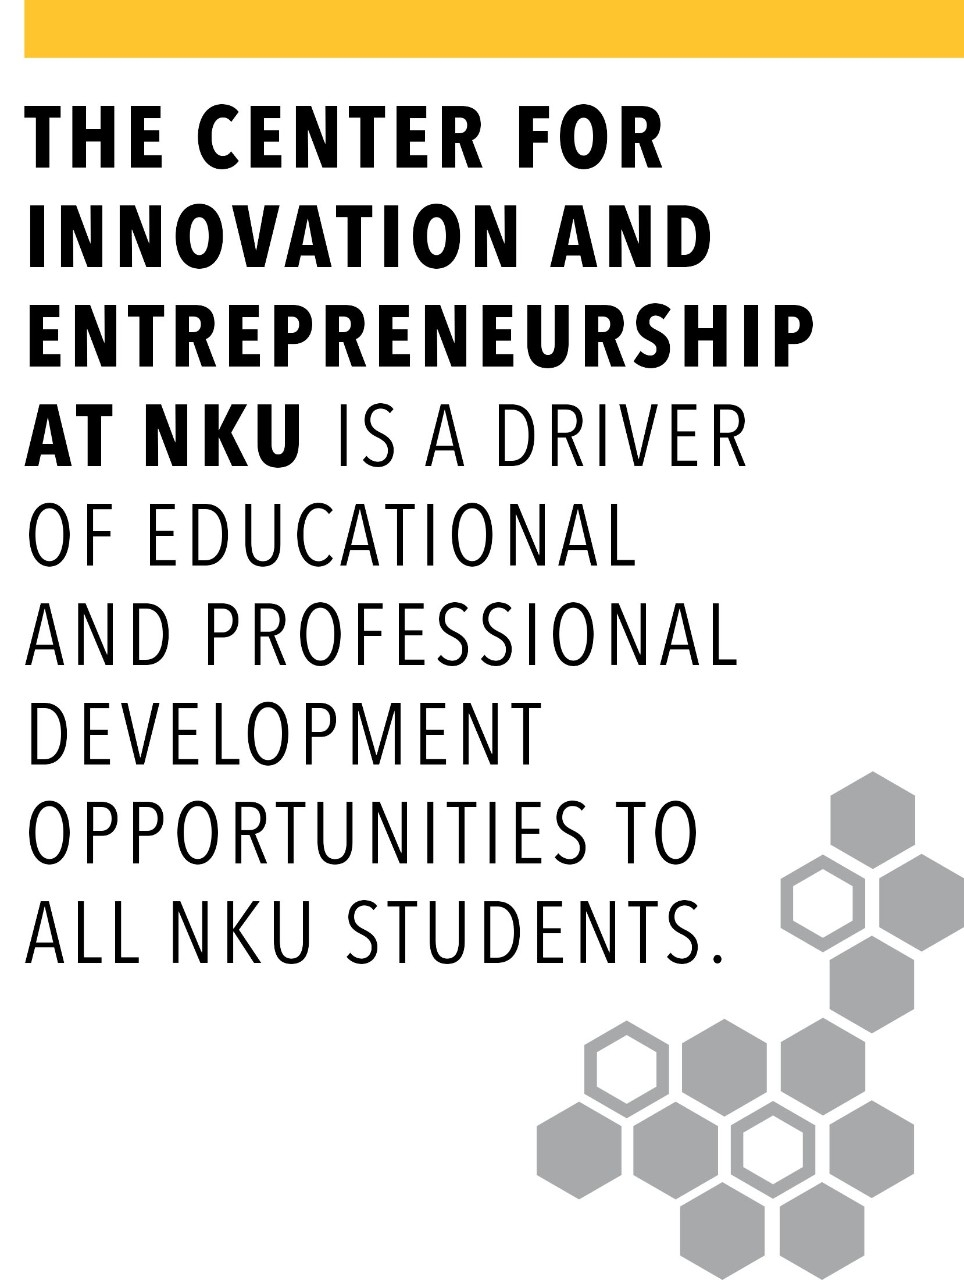 The Center for Innovation and Entrepreneurship at 91 is a driver of educational and professional development opportunities to all 91 students.